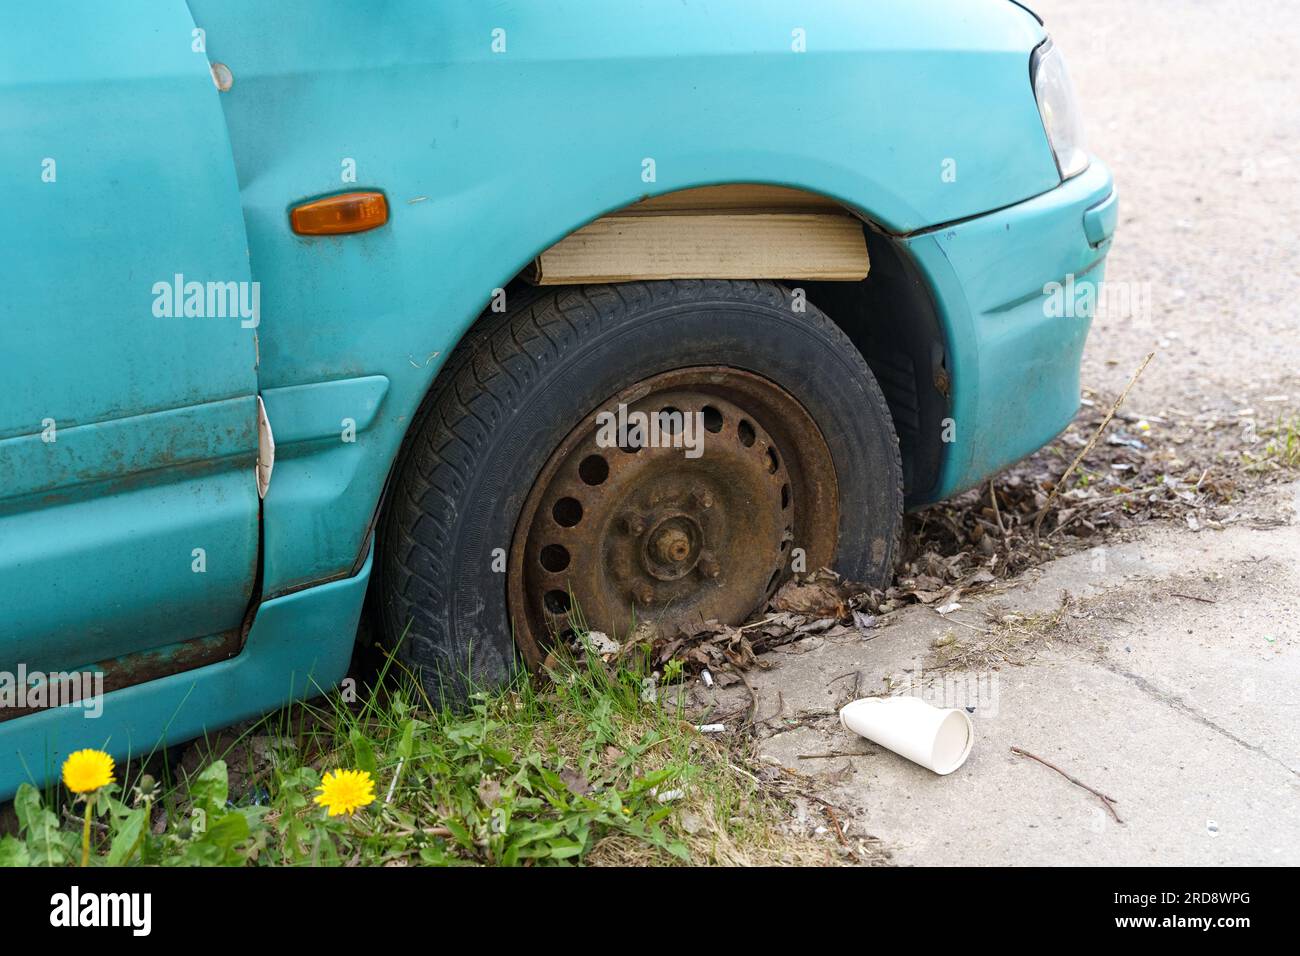 There is an old blue unused car with a flat tire on the street. Close-up. Stock Photo